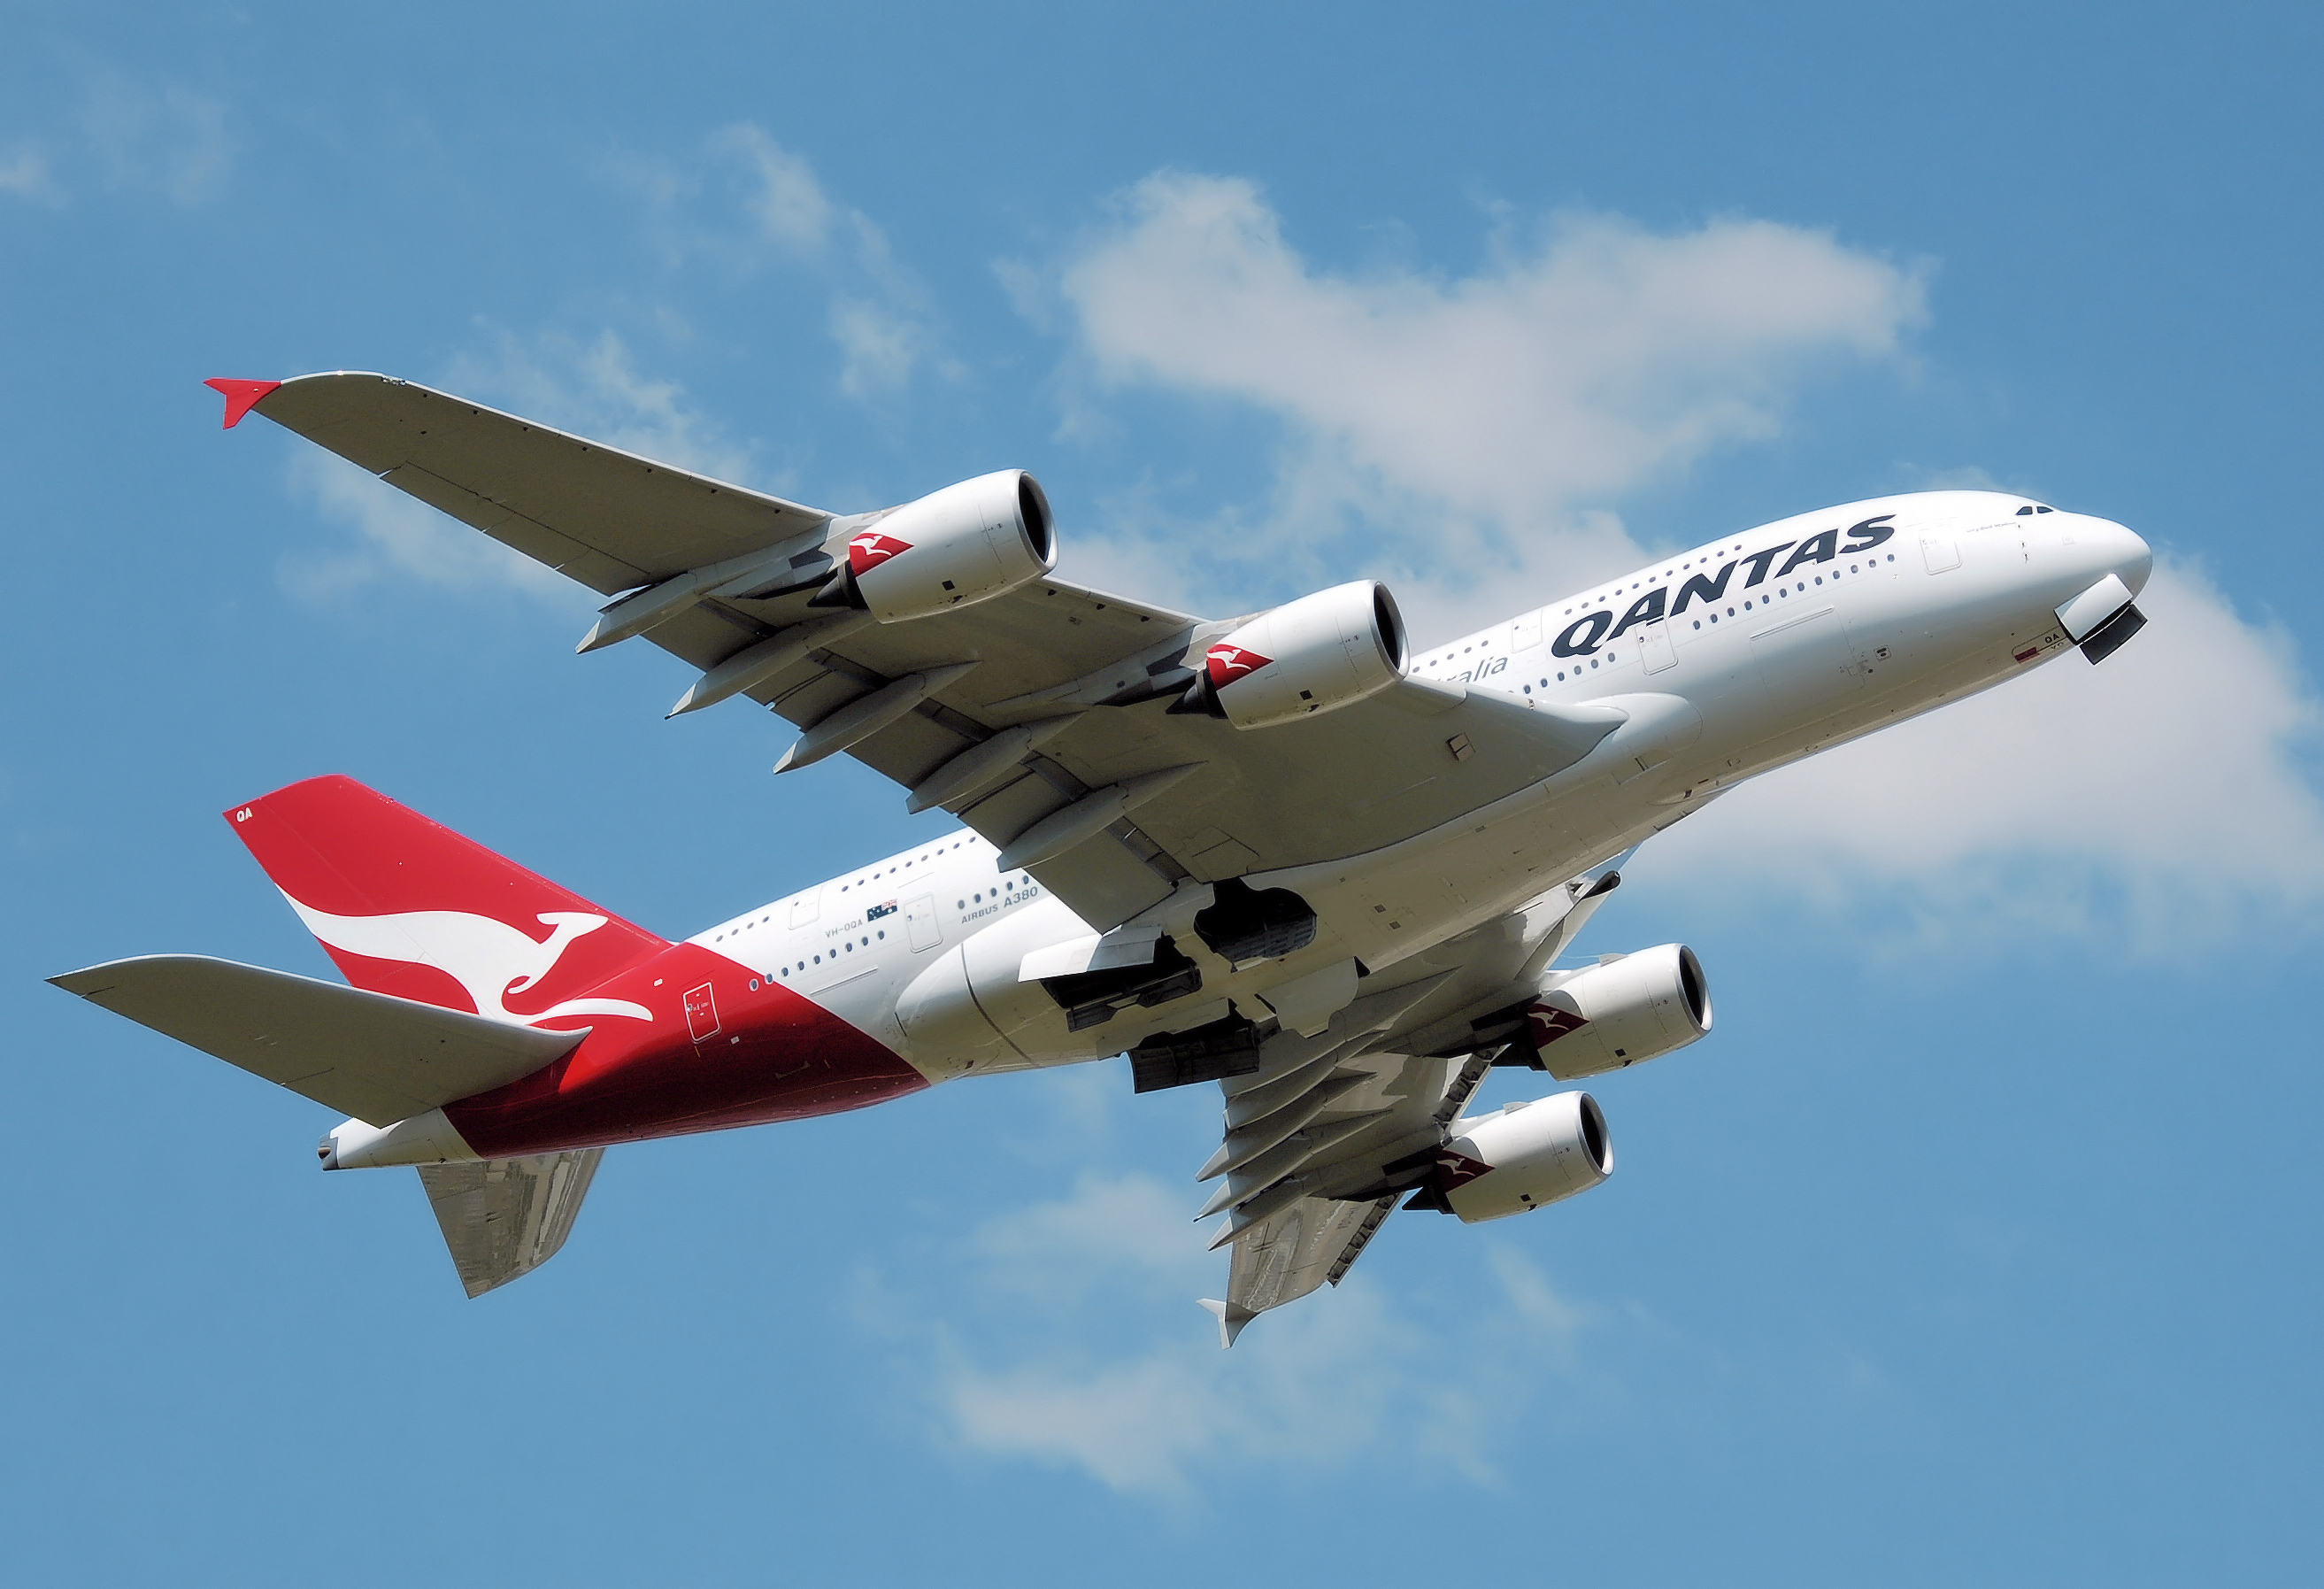 LIMITED TIME: Earn 50% more points on Qantas flights